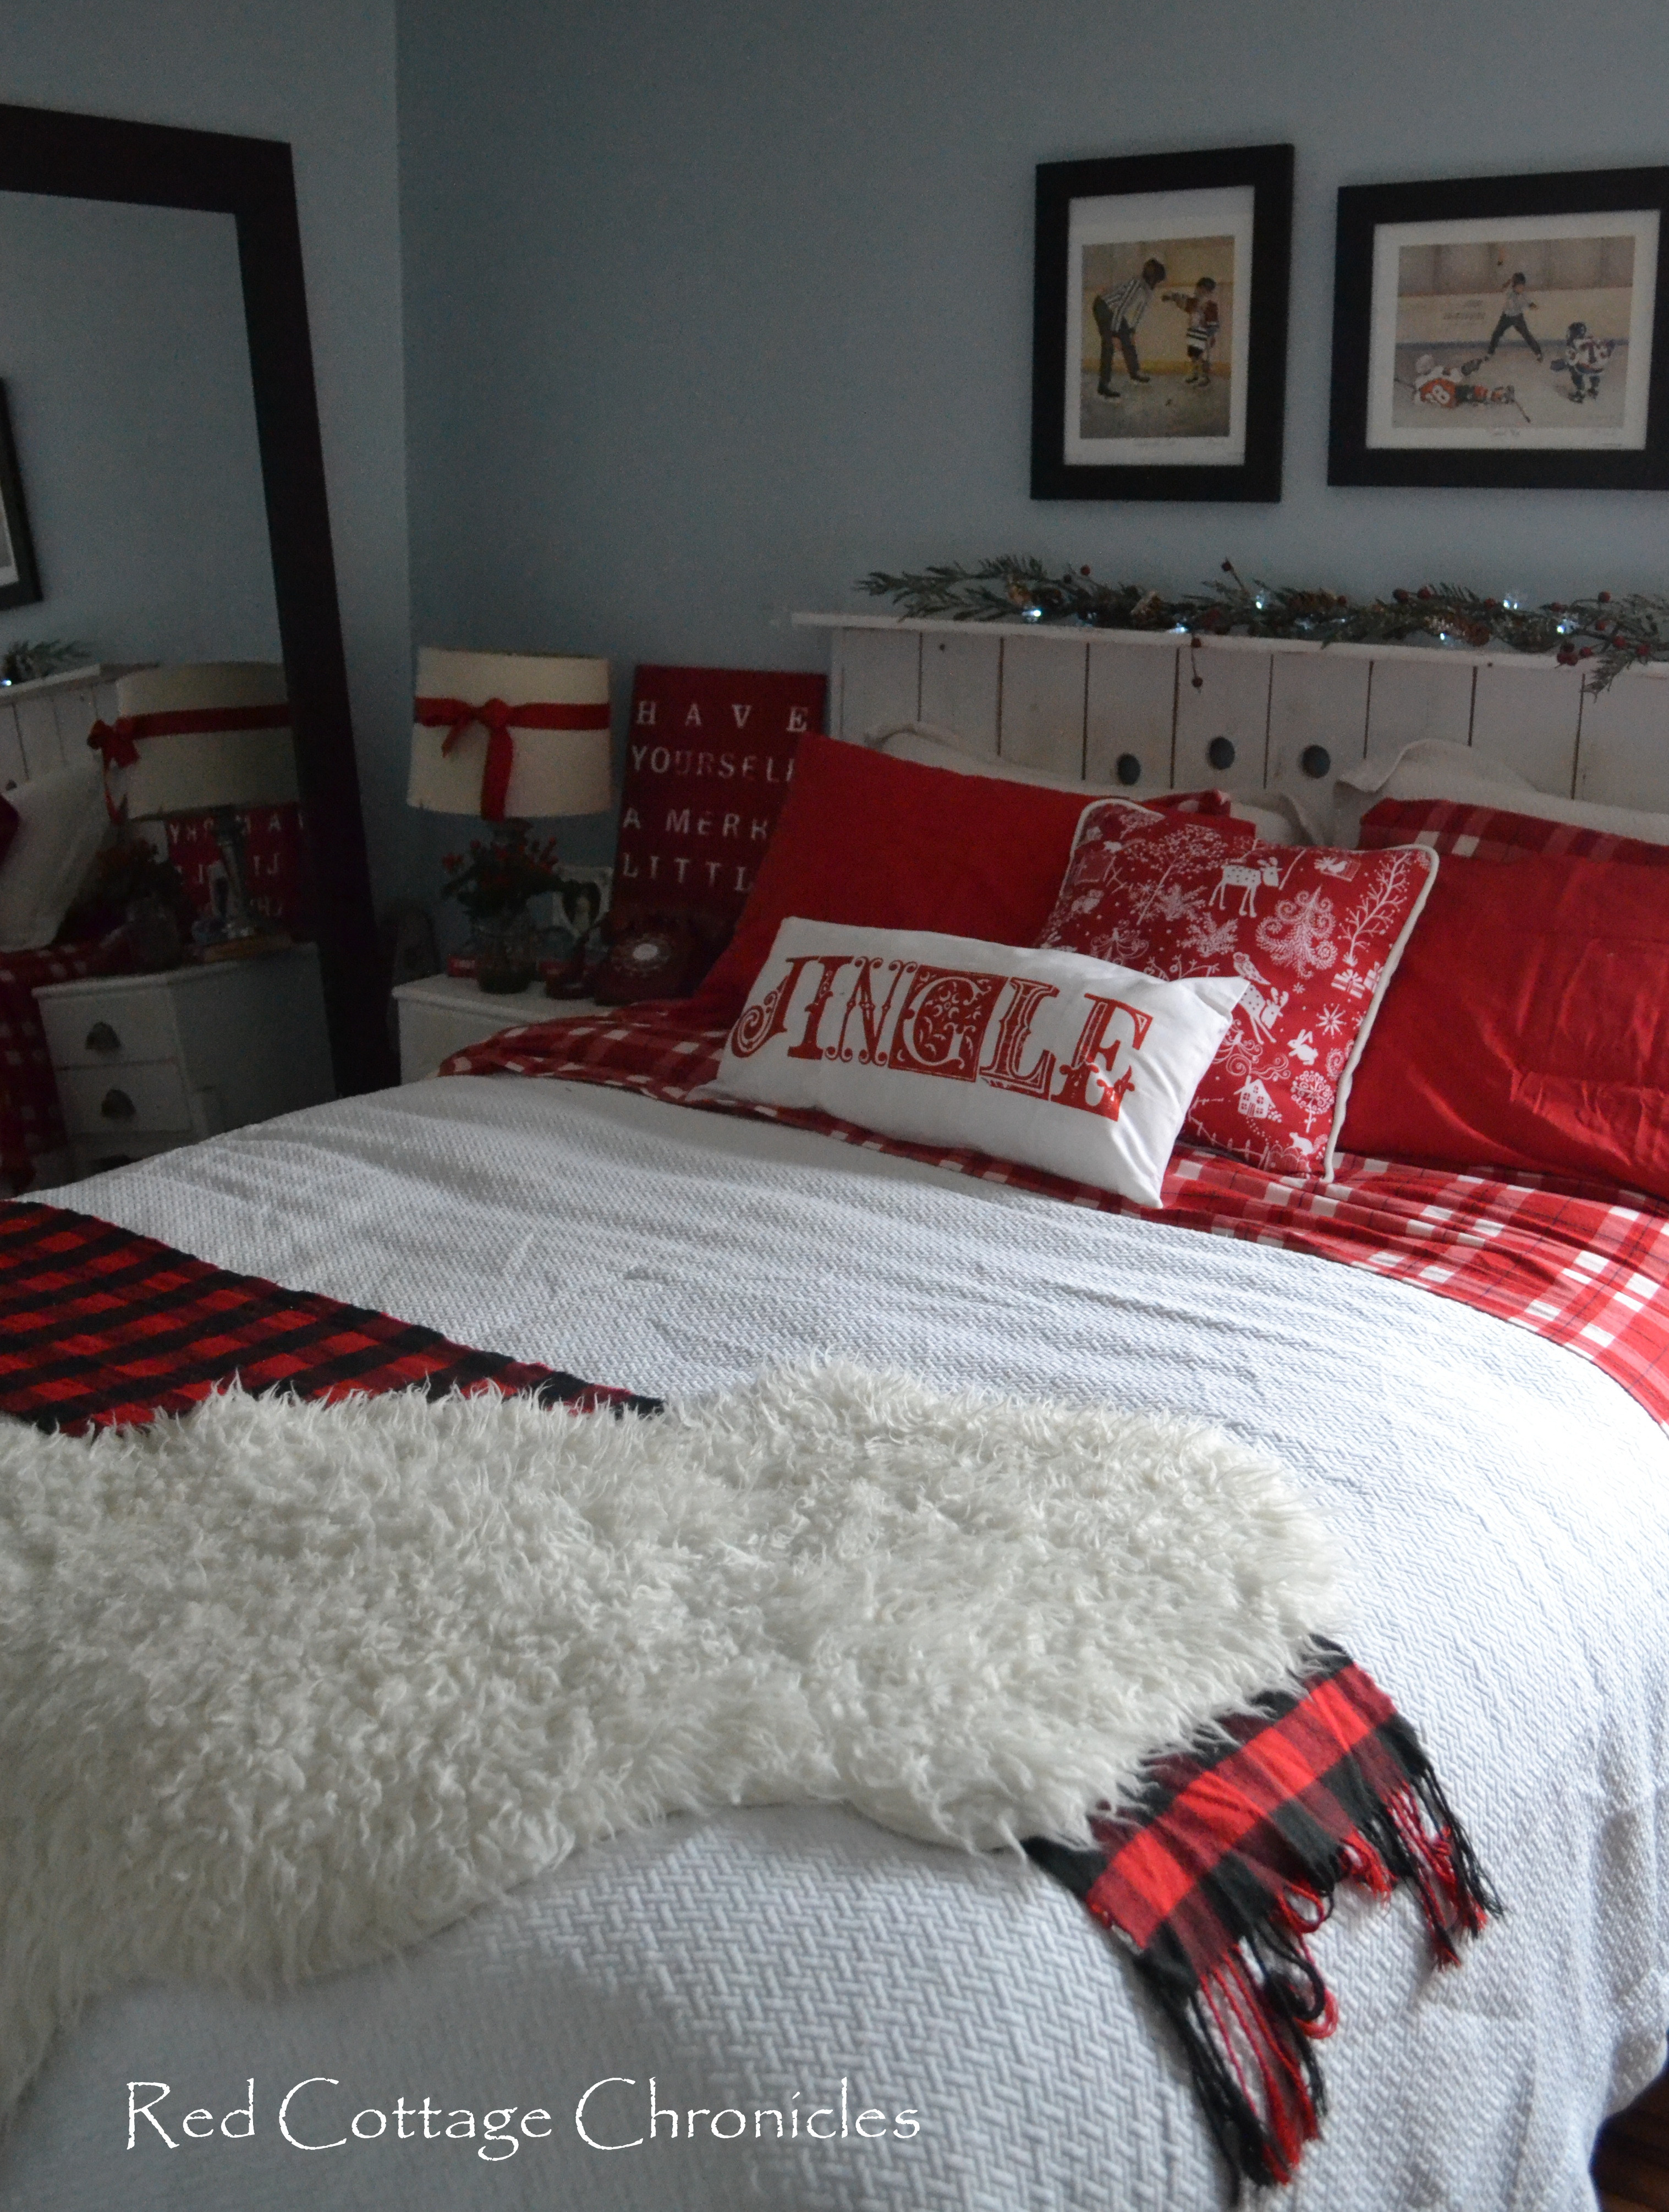 Christmas Bedroom Decor
 Our Christmas Bedroom Red Cottage Chronicles